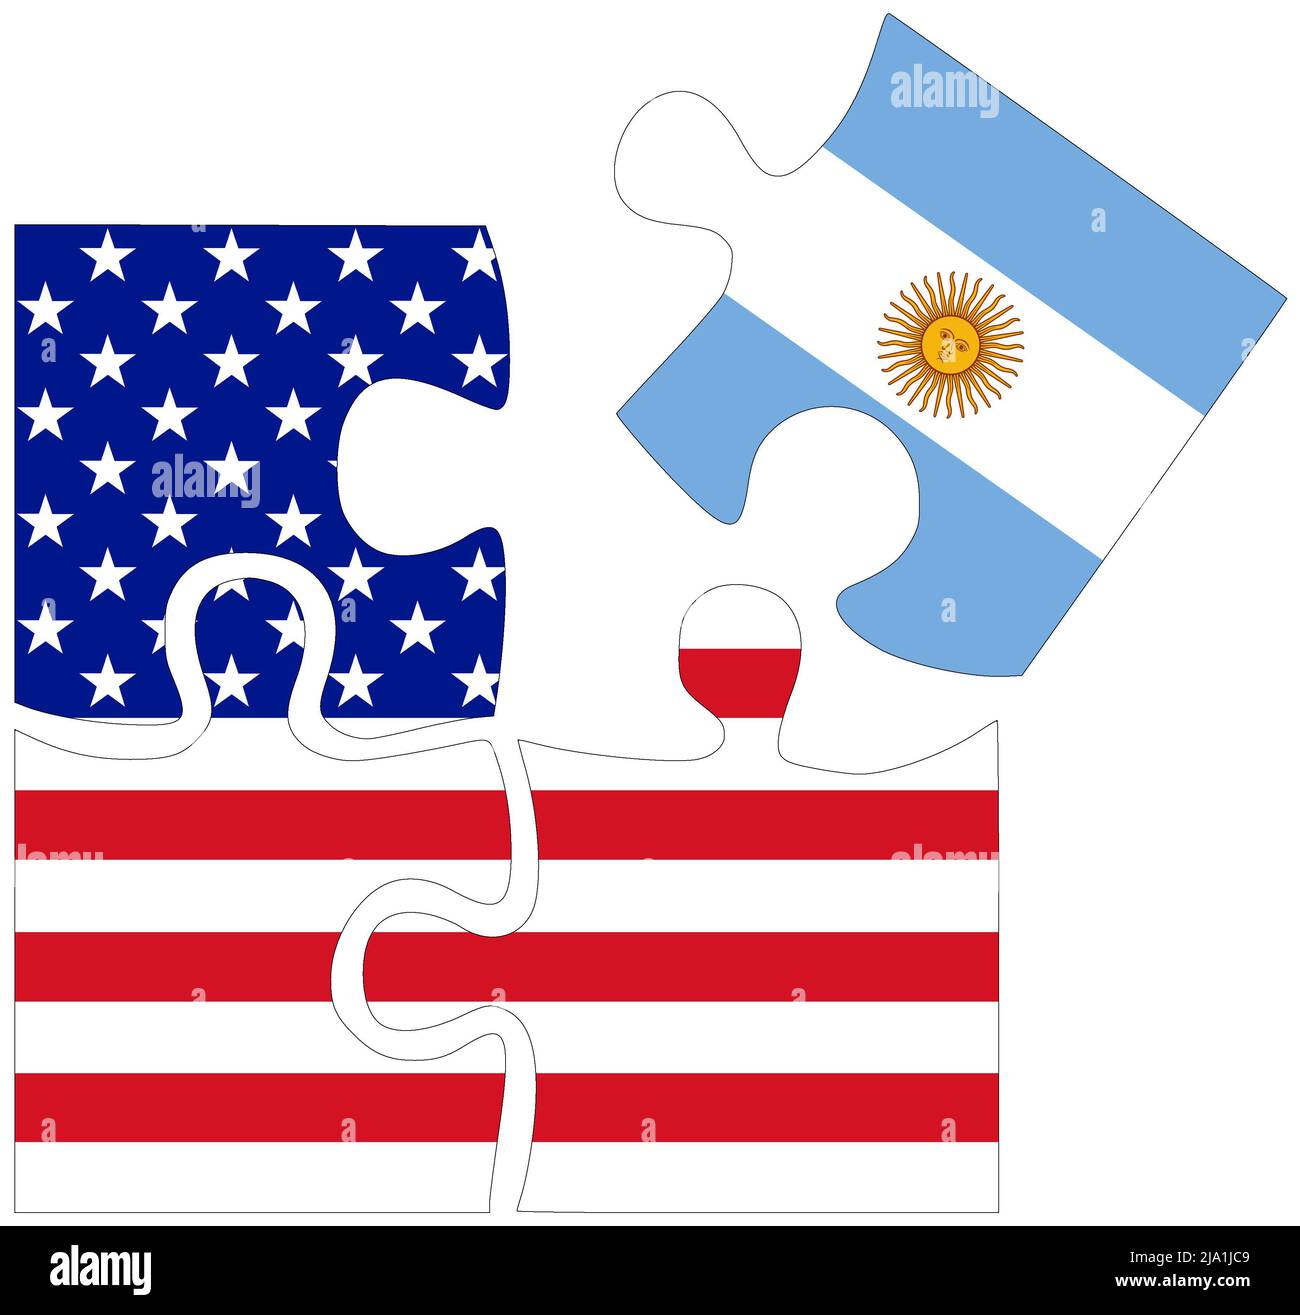 USA - Argentina : puzzle shapes with flags, symbol of agreement or friendship Stock Photo